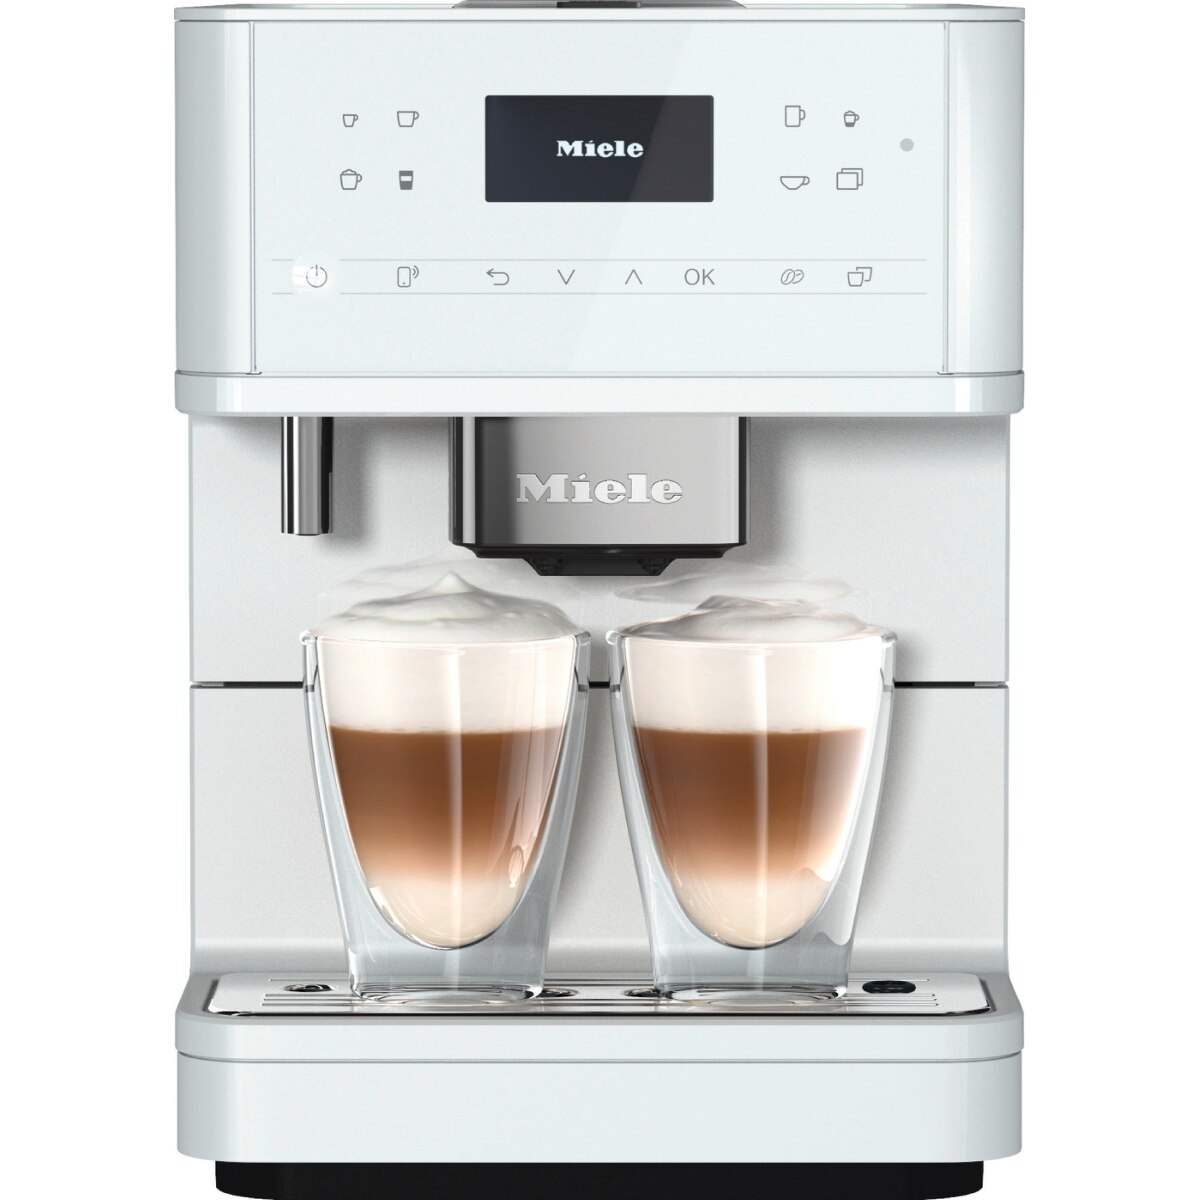 Fotografie Espressor automat Miele CM 6160 MilkPerfection White, 15 bar, 1,8 L, WiFiConn@ct, OneTouch for Two, AromaticSystem, Alb